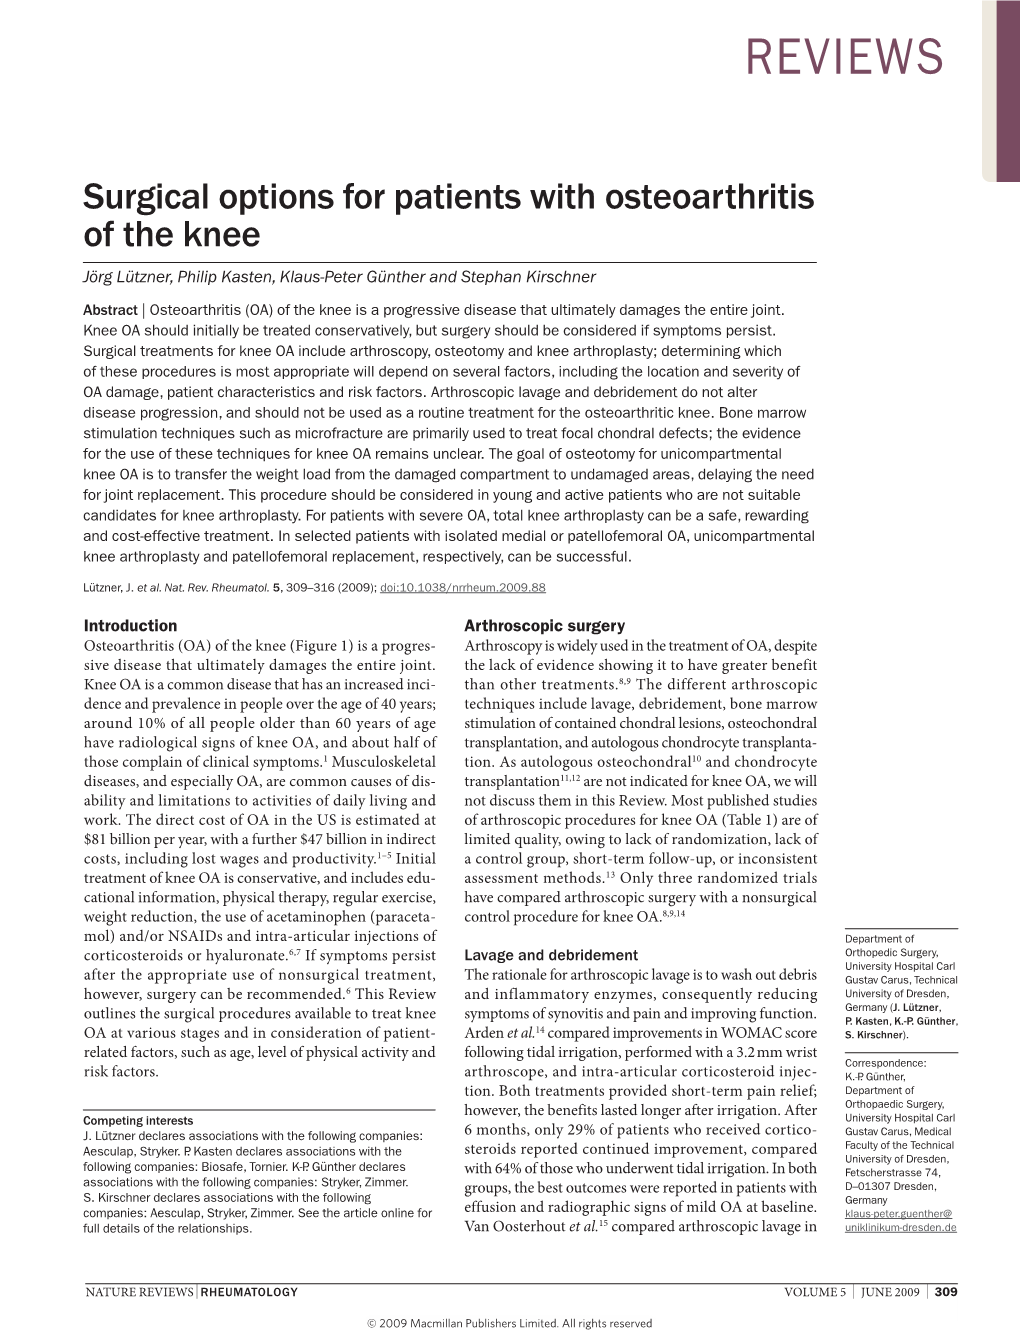 Surgical Options for Patients with Osteoarthritis of the Knee Jörg Lützner, Philip Kasten, Klaus-Peter Günther and Stephan Kirschner